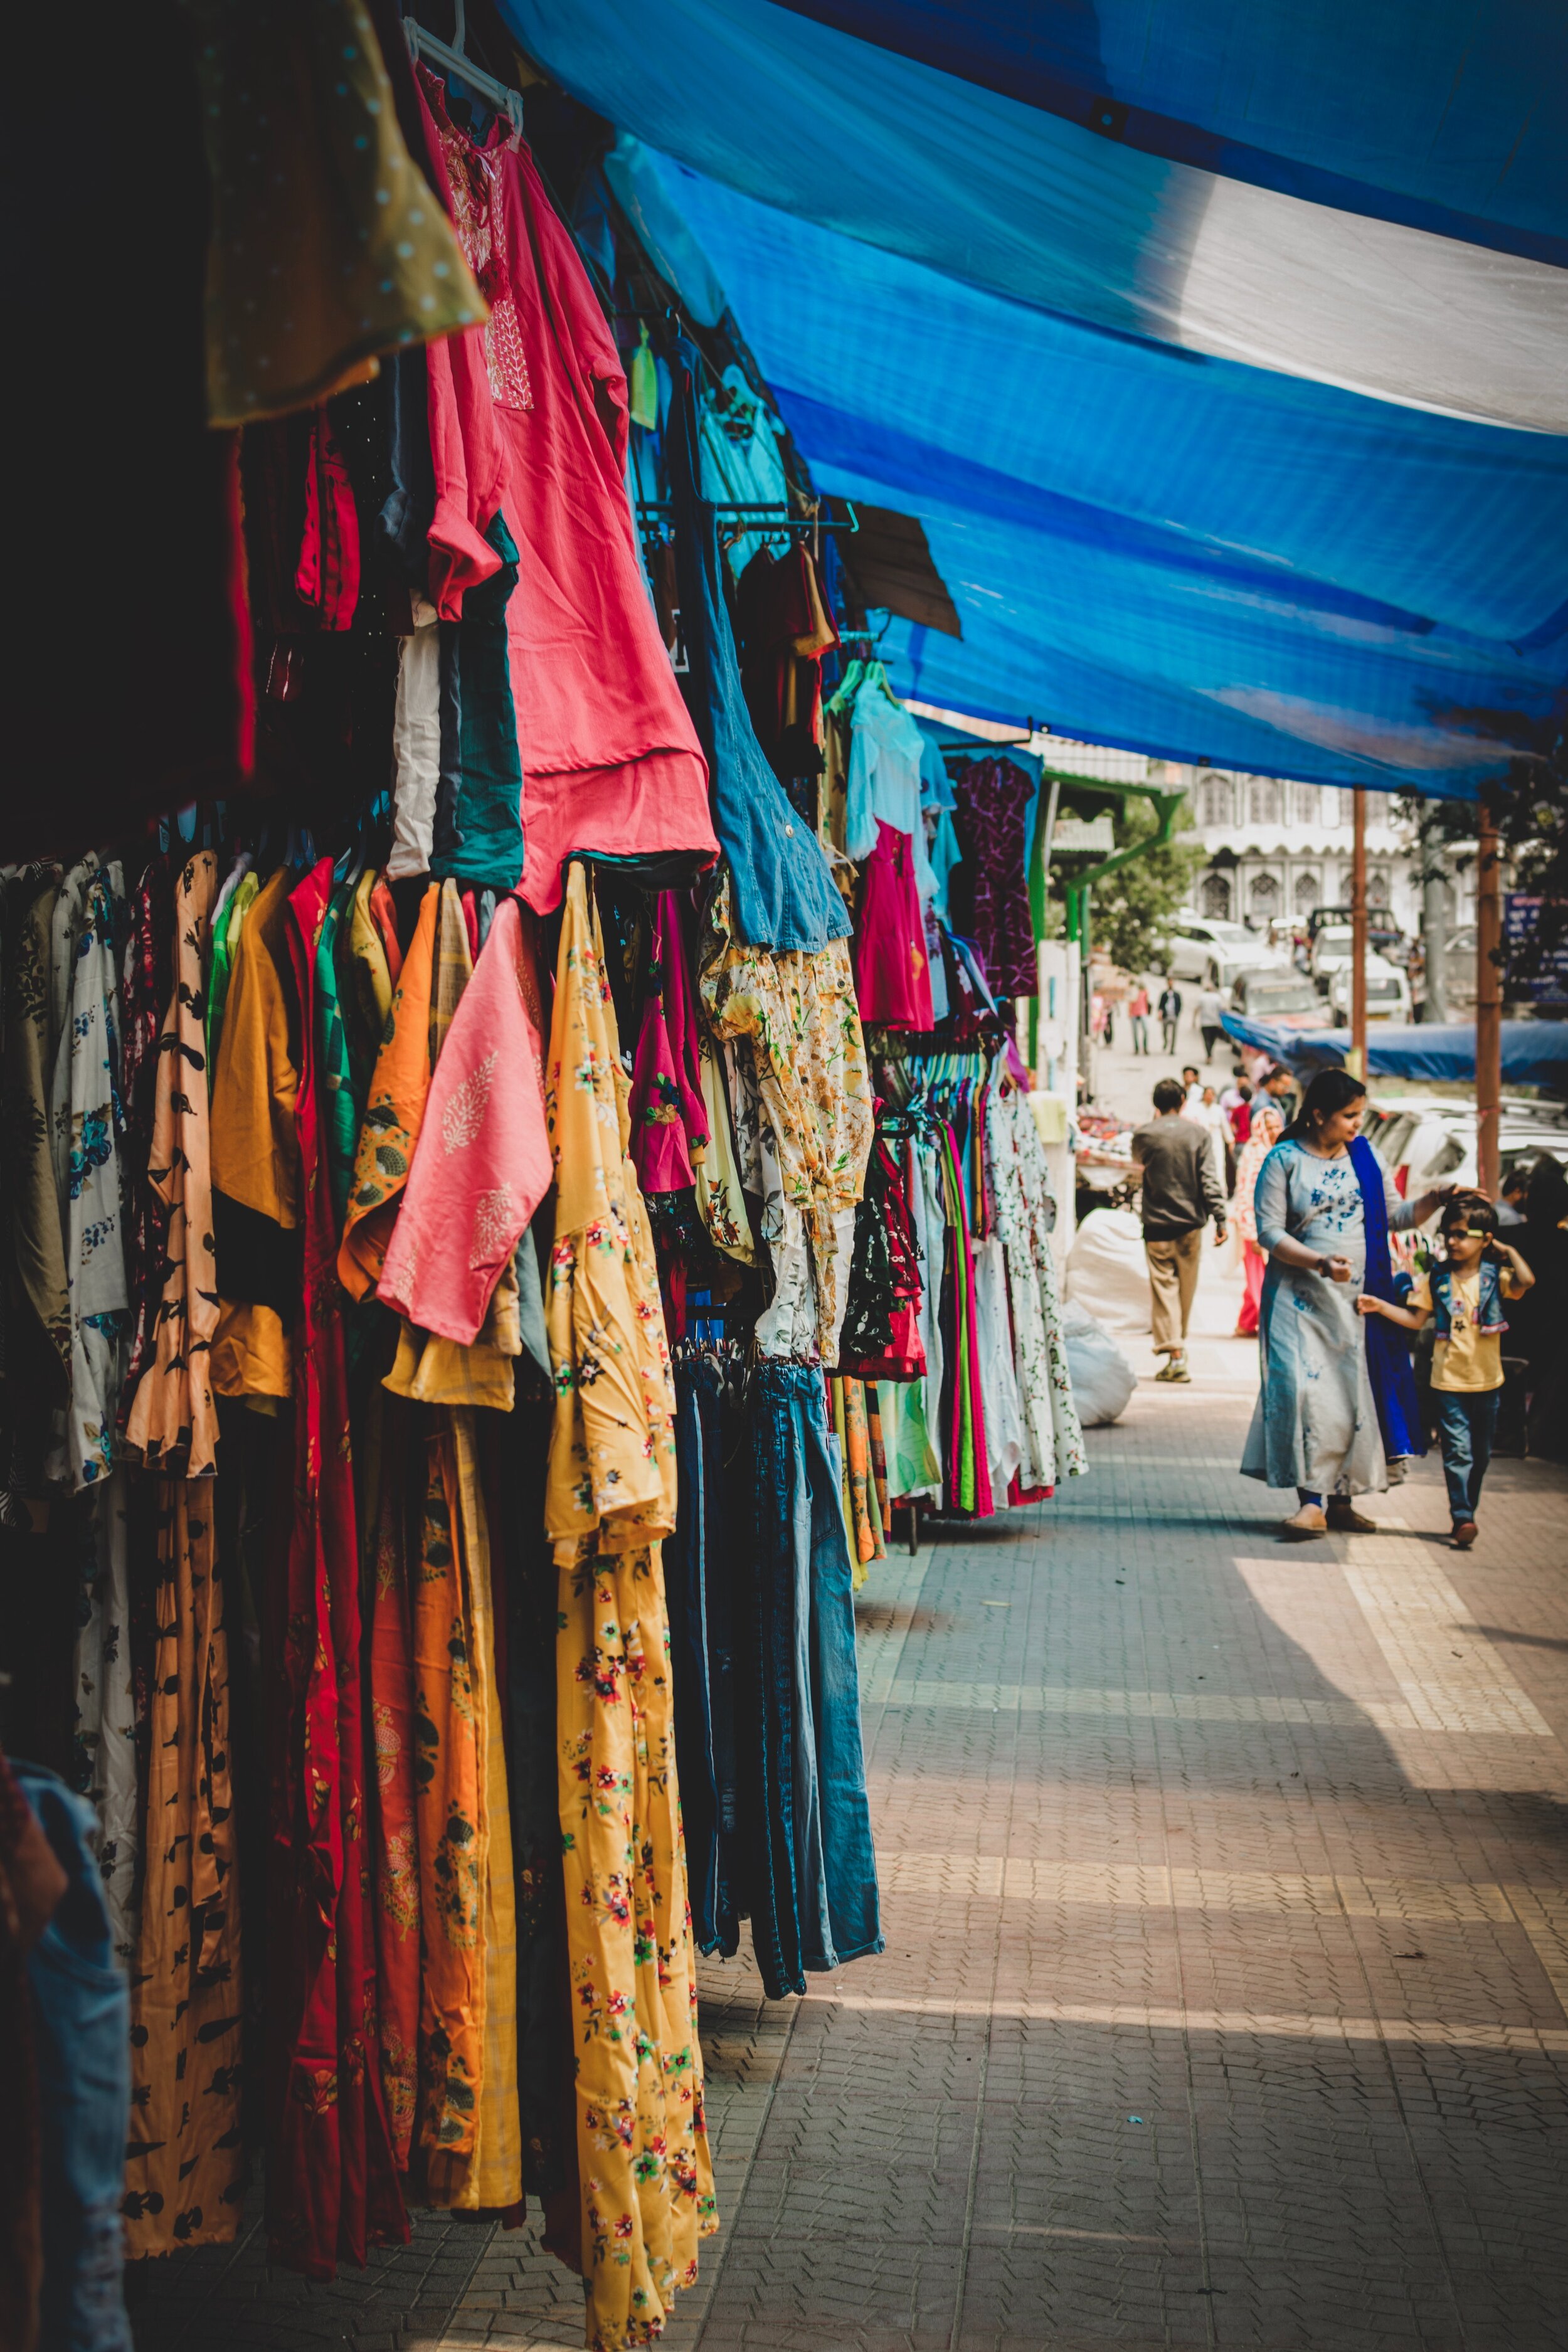 stores-on-sidewalk-selling-clothes-2460457.jpg